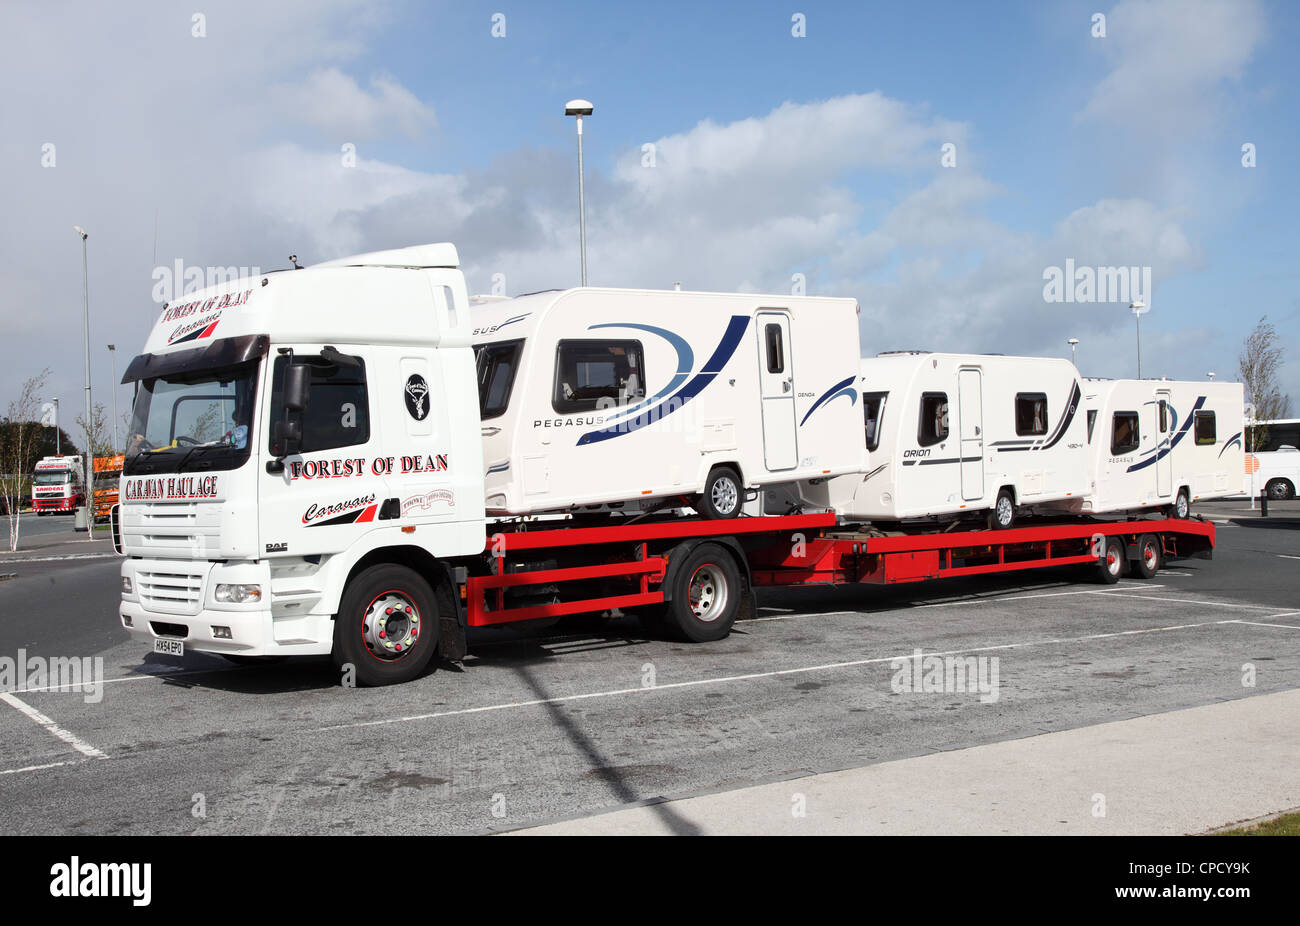 A DAF truck  and trailer, owned by Forest of Dean caravans, carrying three new caravans. Stock Photo